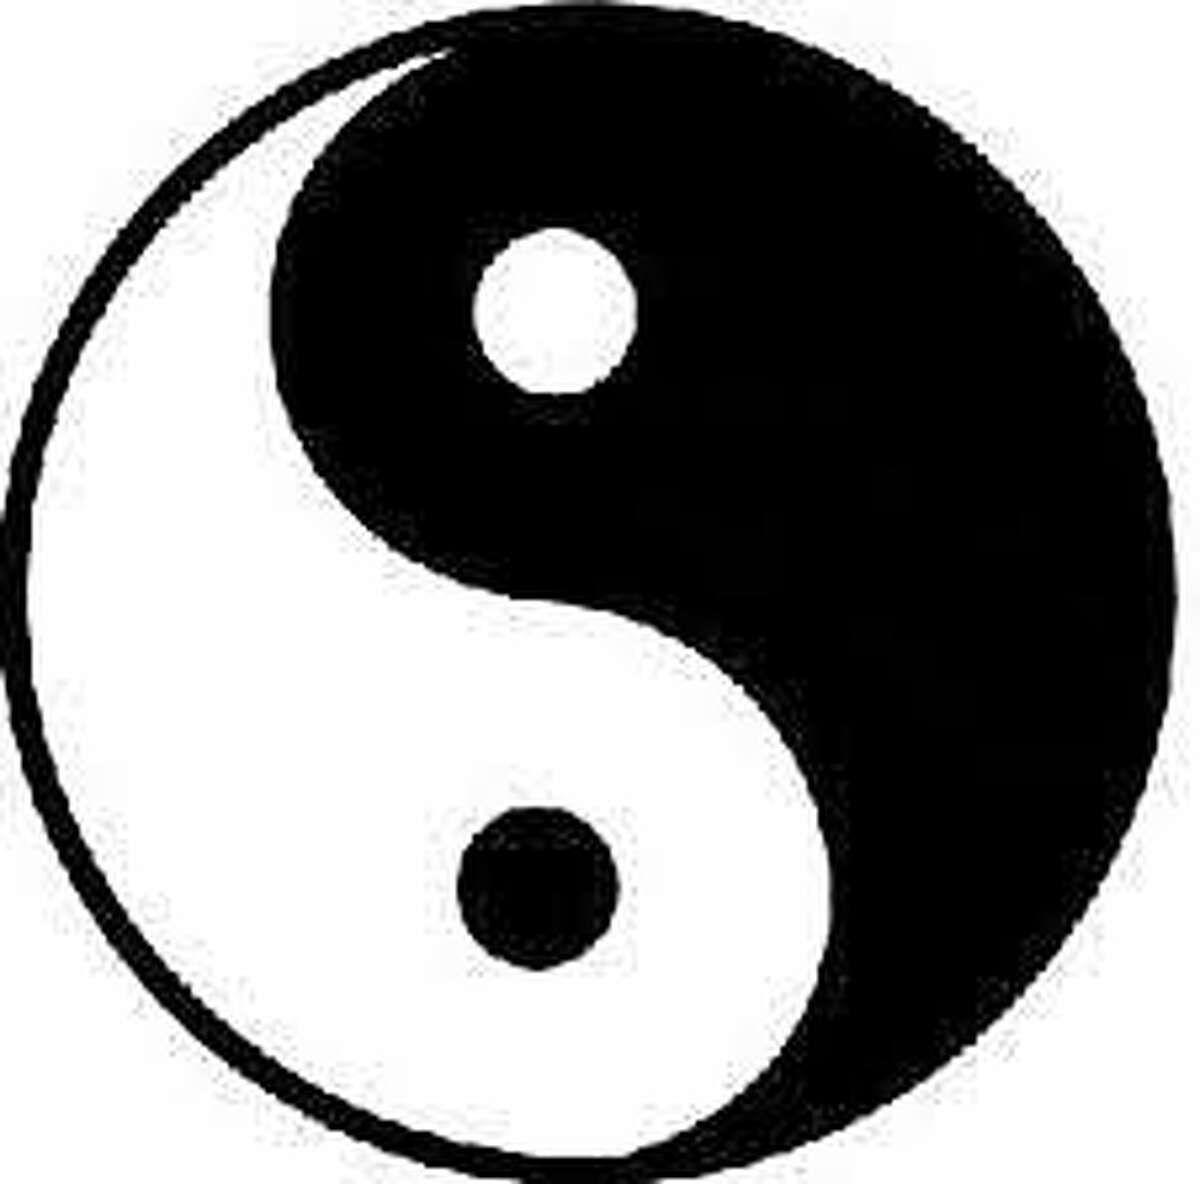 The Taoist symbol of universal opposites, Yin and Yang, represents the inter dependency of opposites.